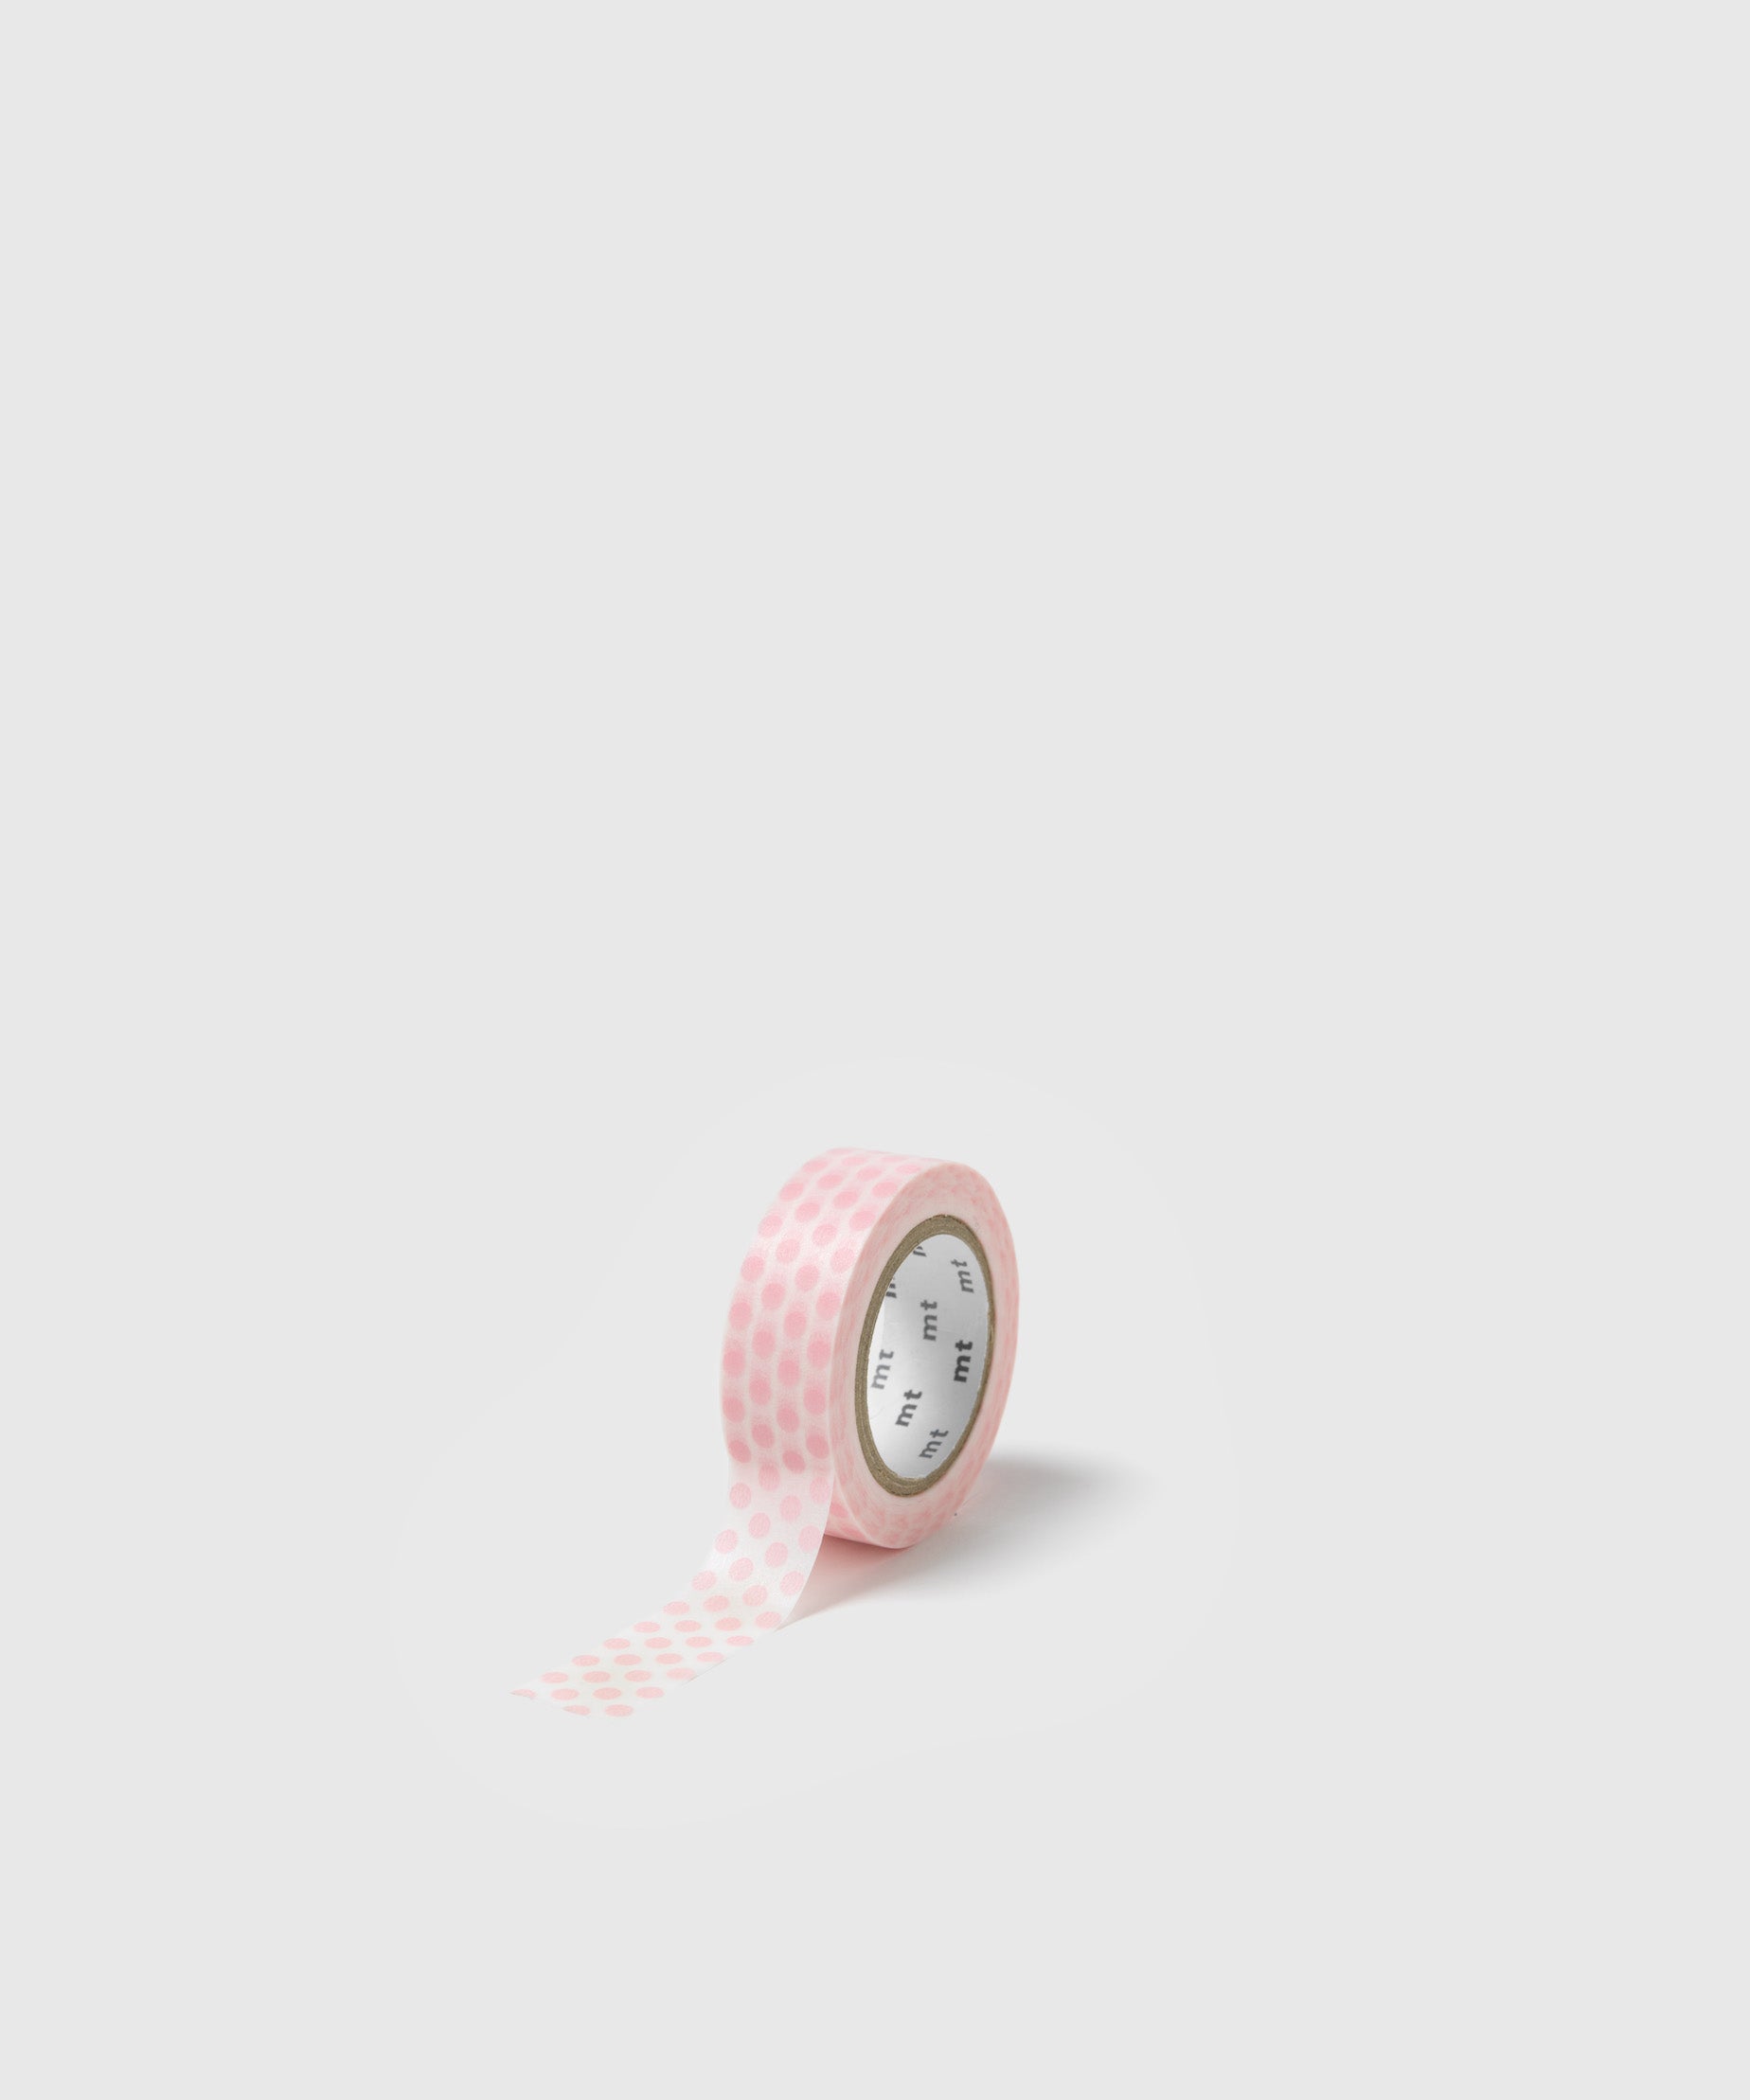 Japanese Washi Tape: A Beginner's Guide from KonMari by Marie Kondo